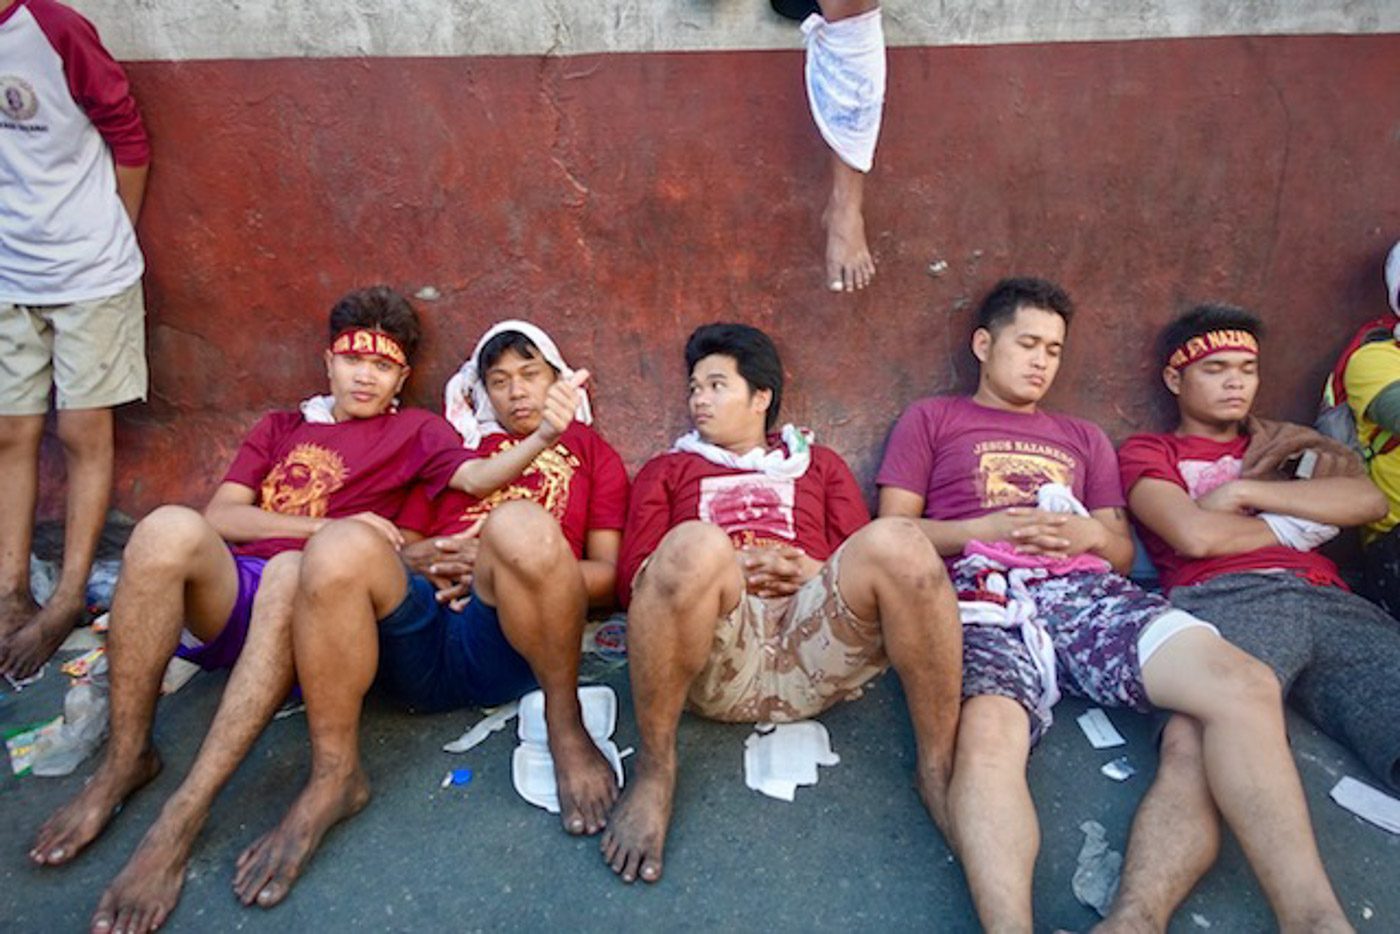 BREAK TIME. Human bridge devotees rest at the bottom of Quezon Boulevard's center isle as other of their colleagues man their shift. Photo by Rambo Talabong/Rappler  